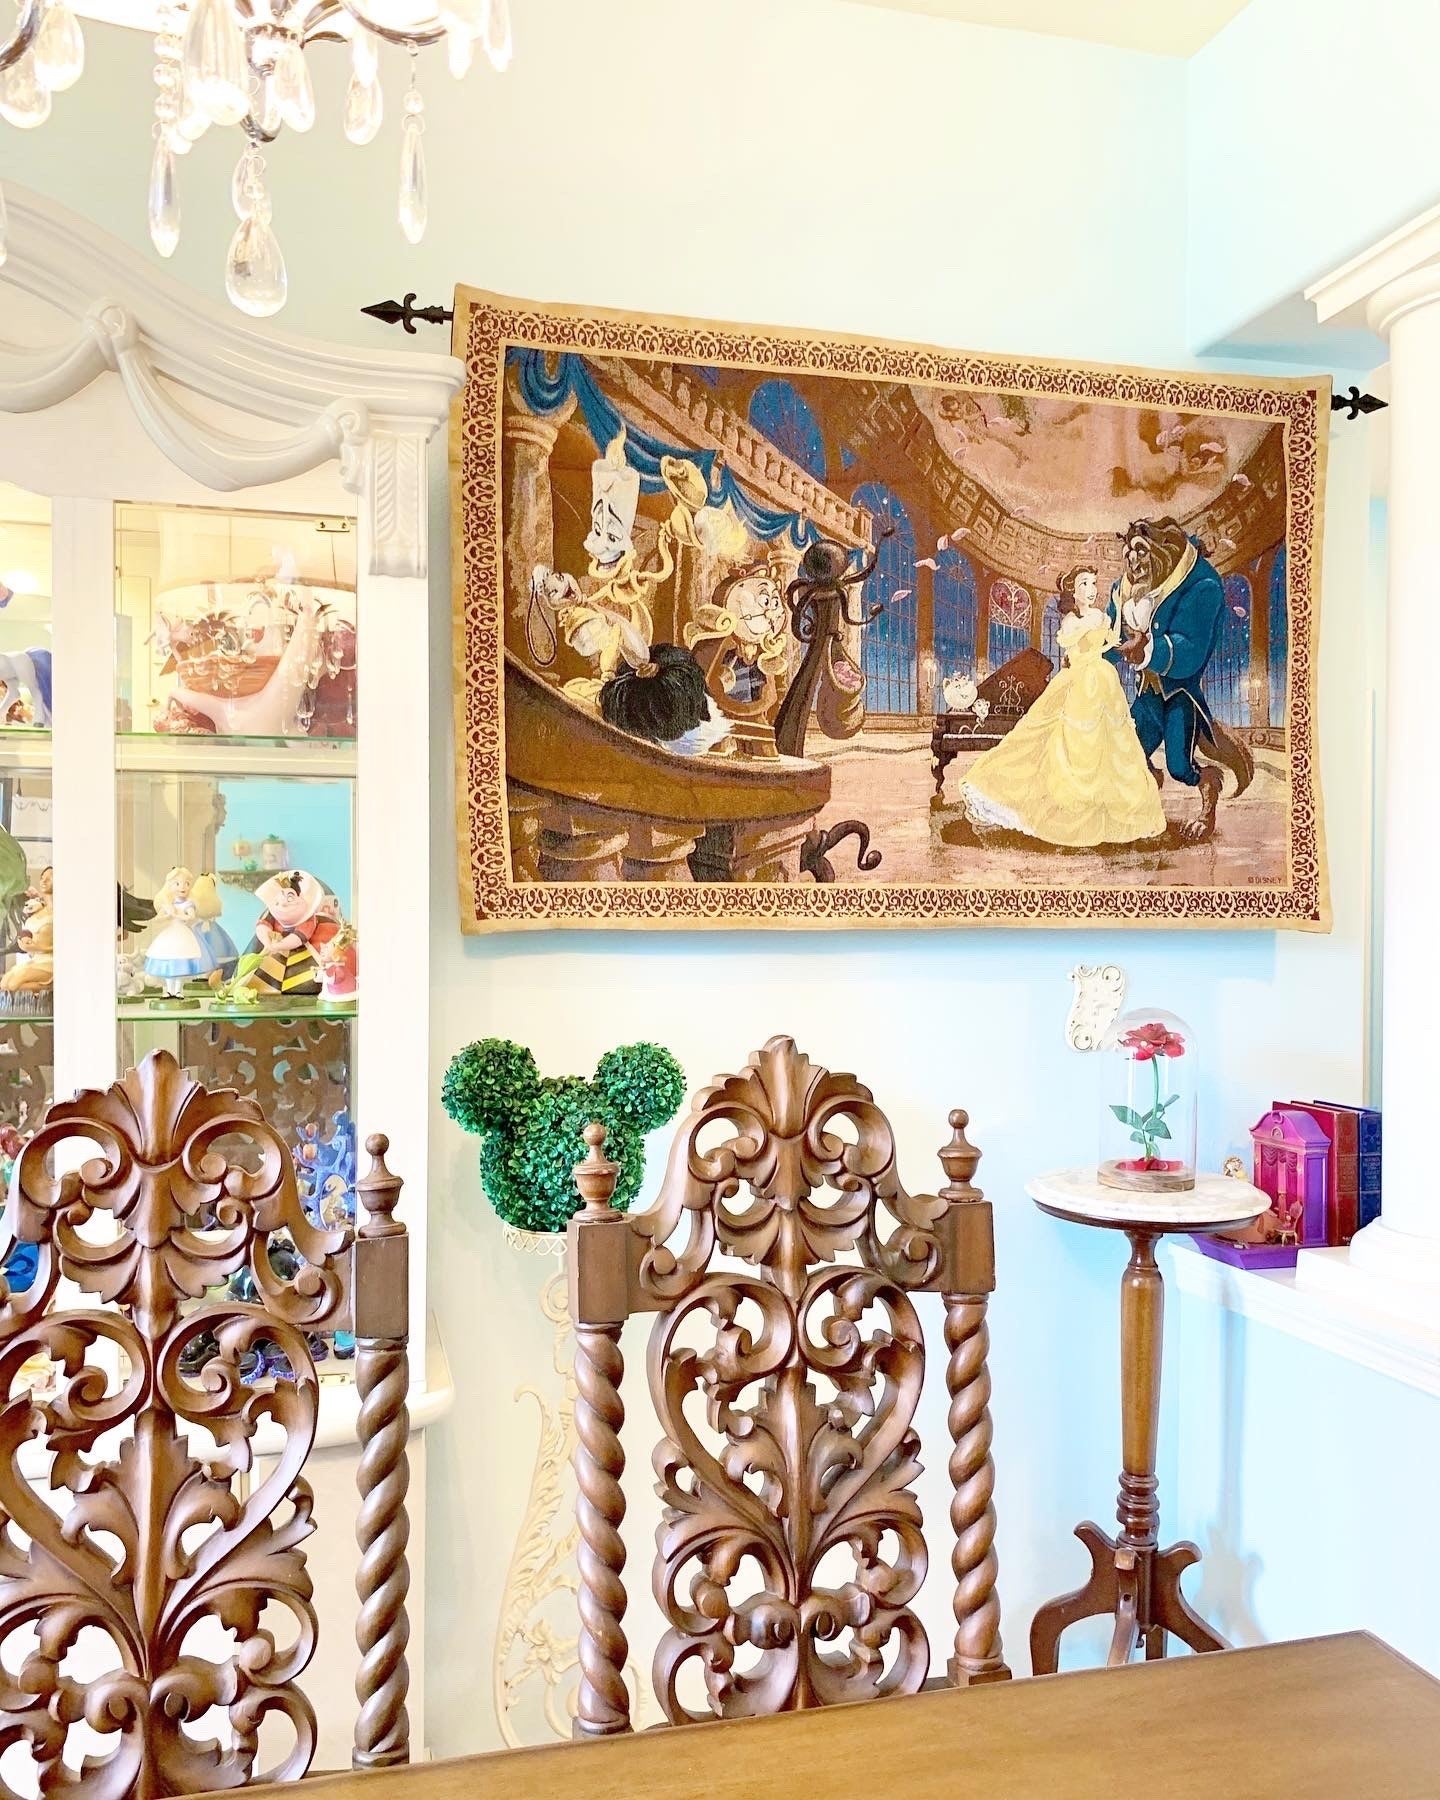 Disney-Inspired Home Decor Helps Fans Take Home the Magic - The New York  Times